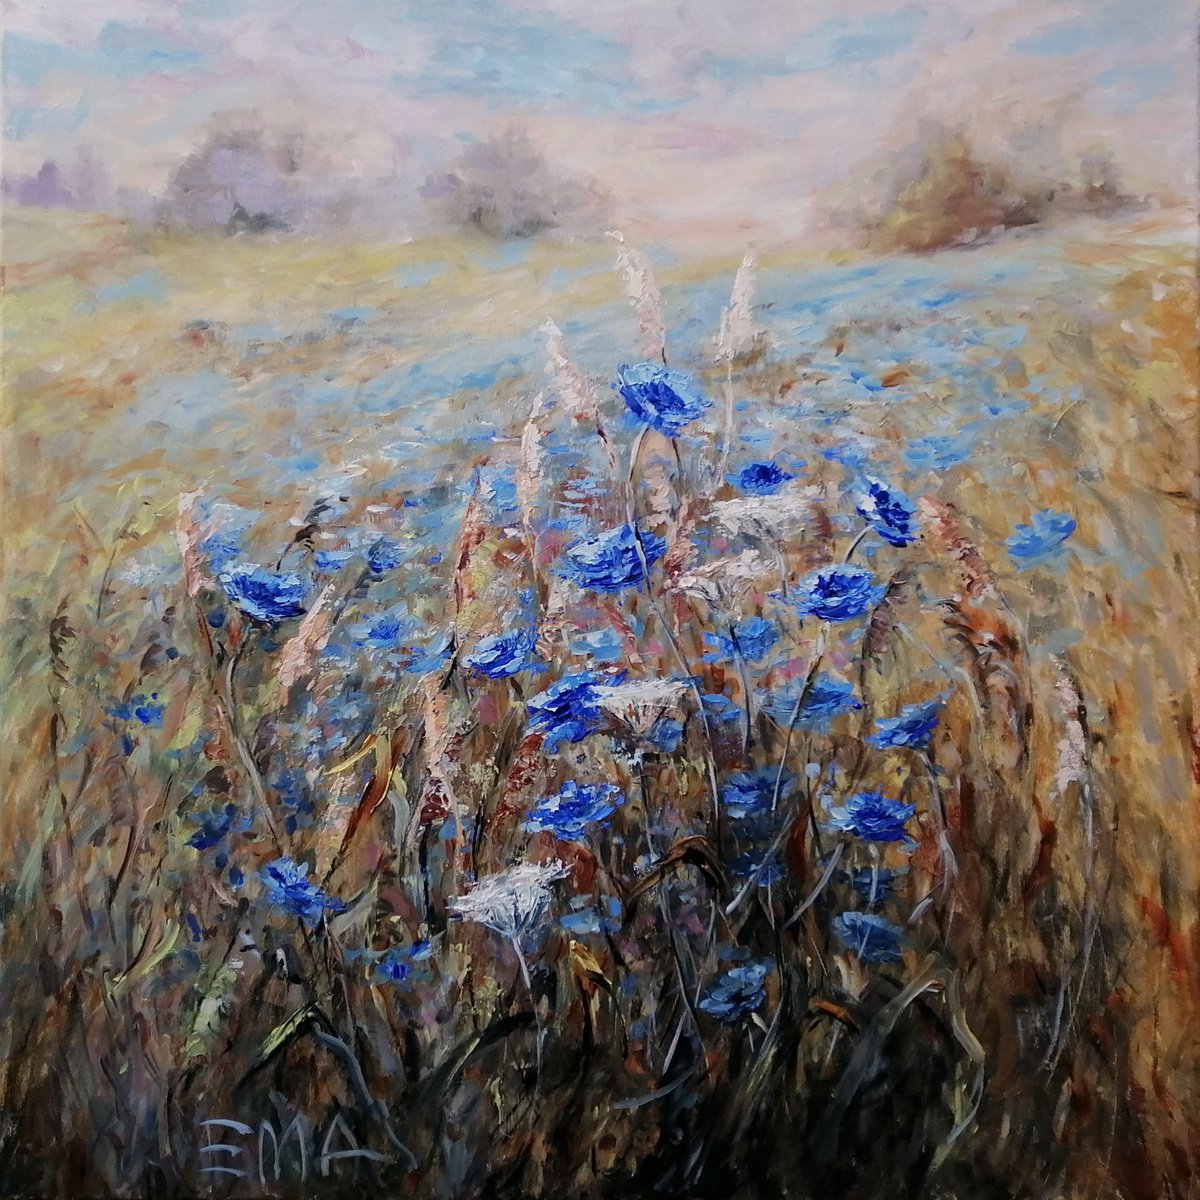 DAY FOR SONGS, 70x70cm, blue wild flowers meadow by Emilia Milcheva